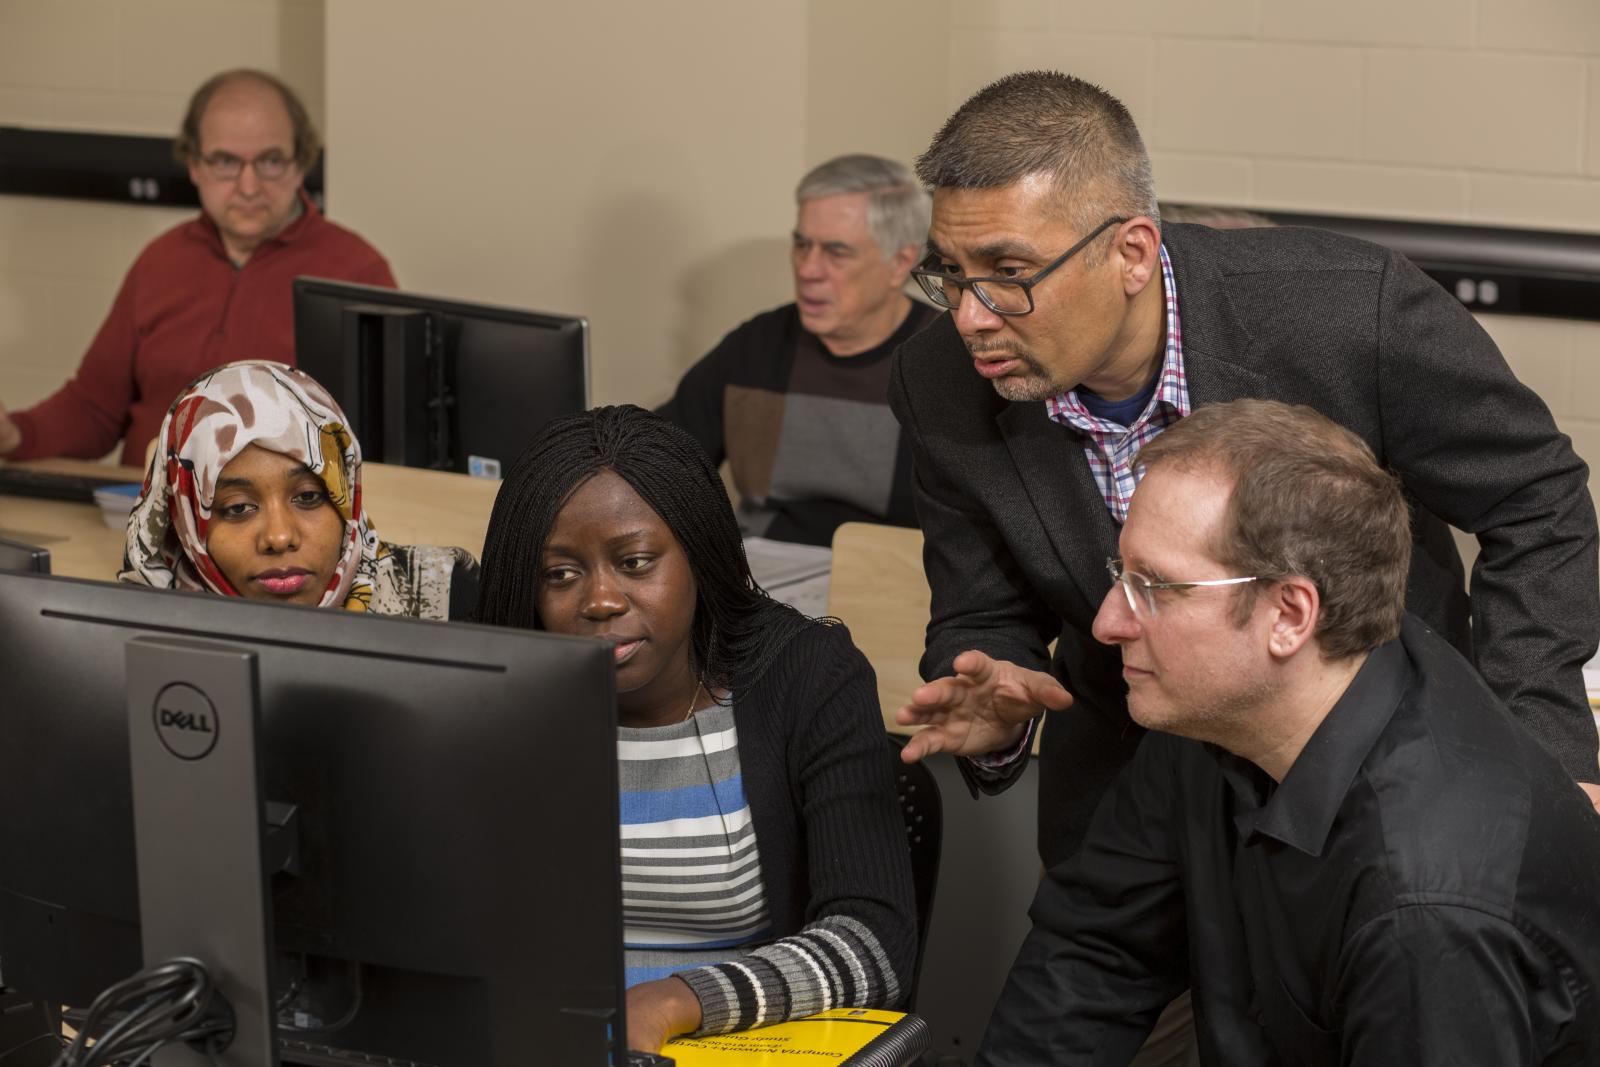 students and a faculty member work together in a computer lab